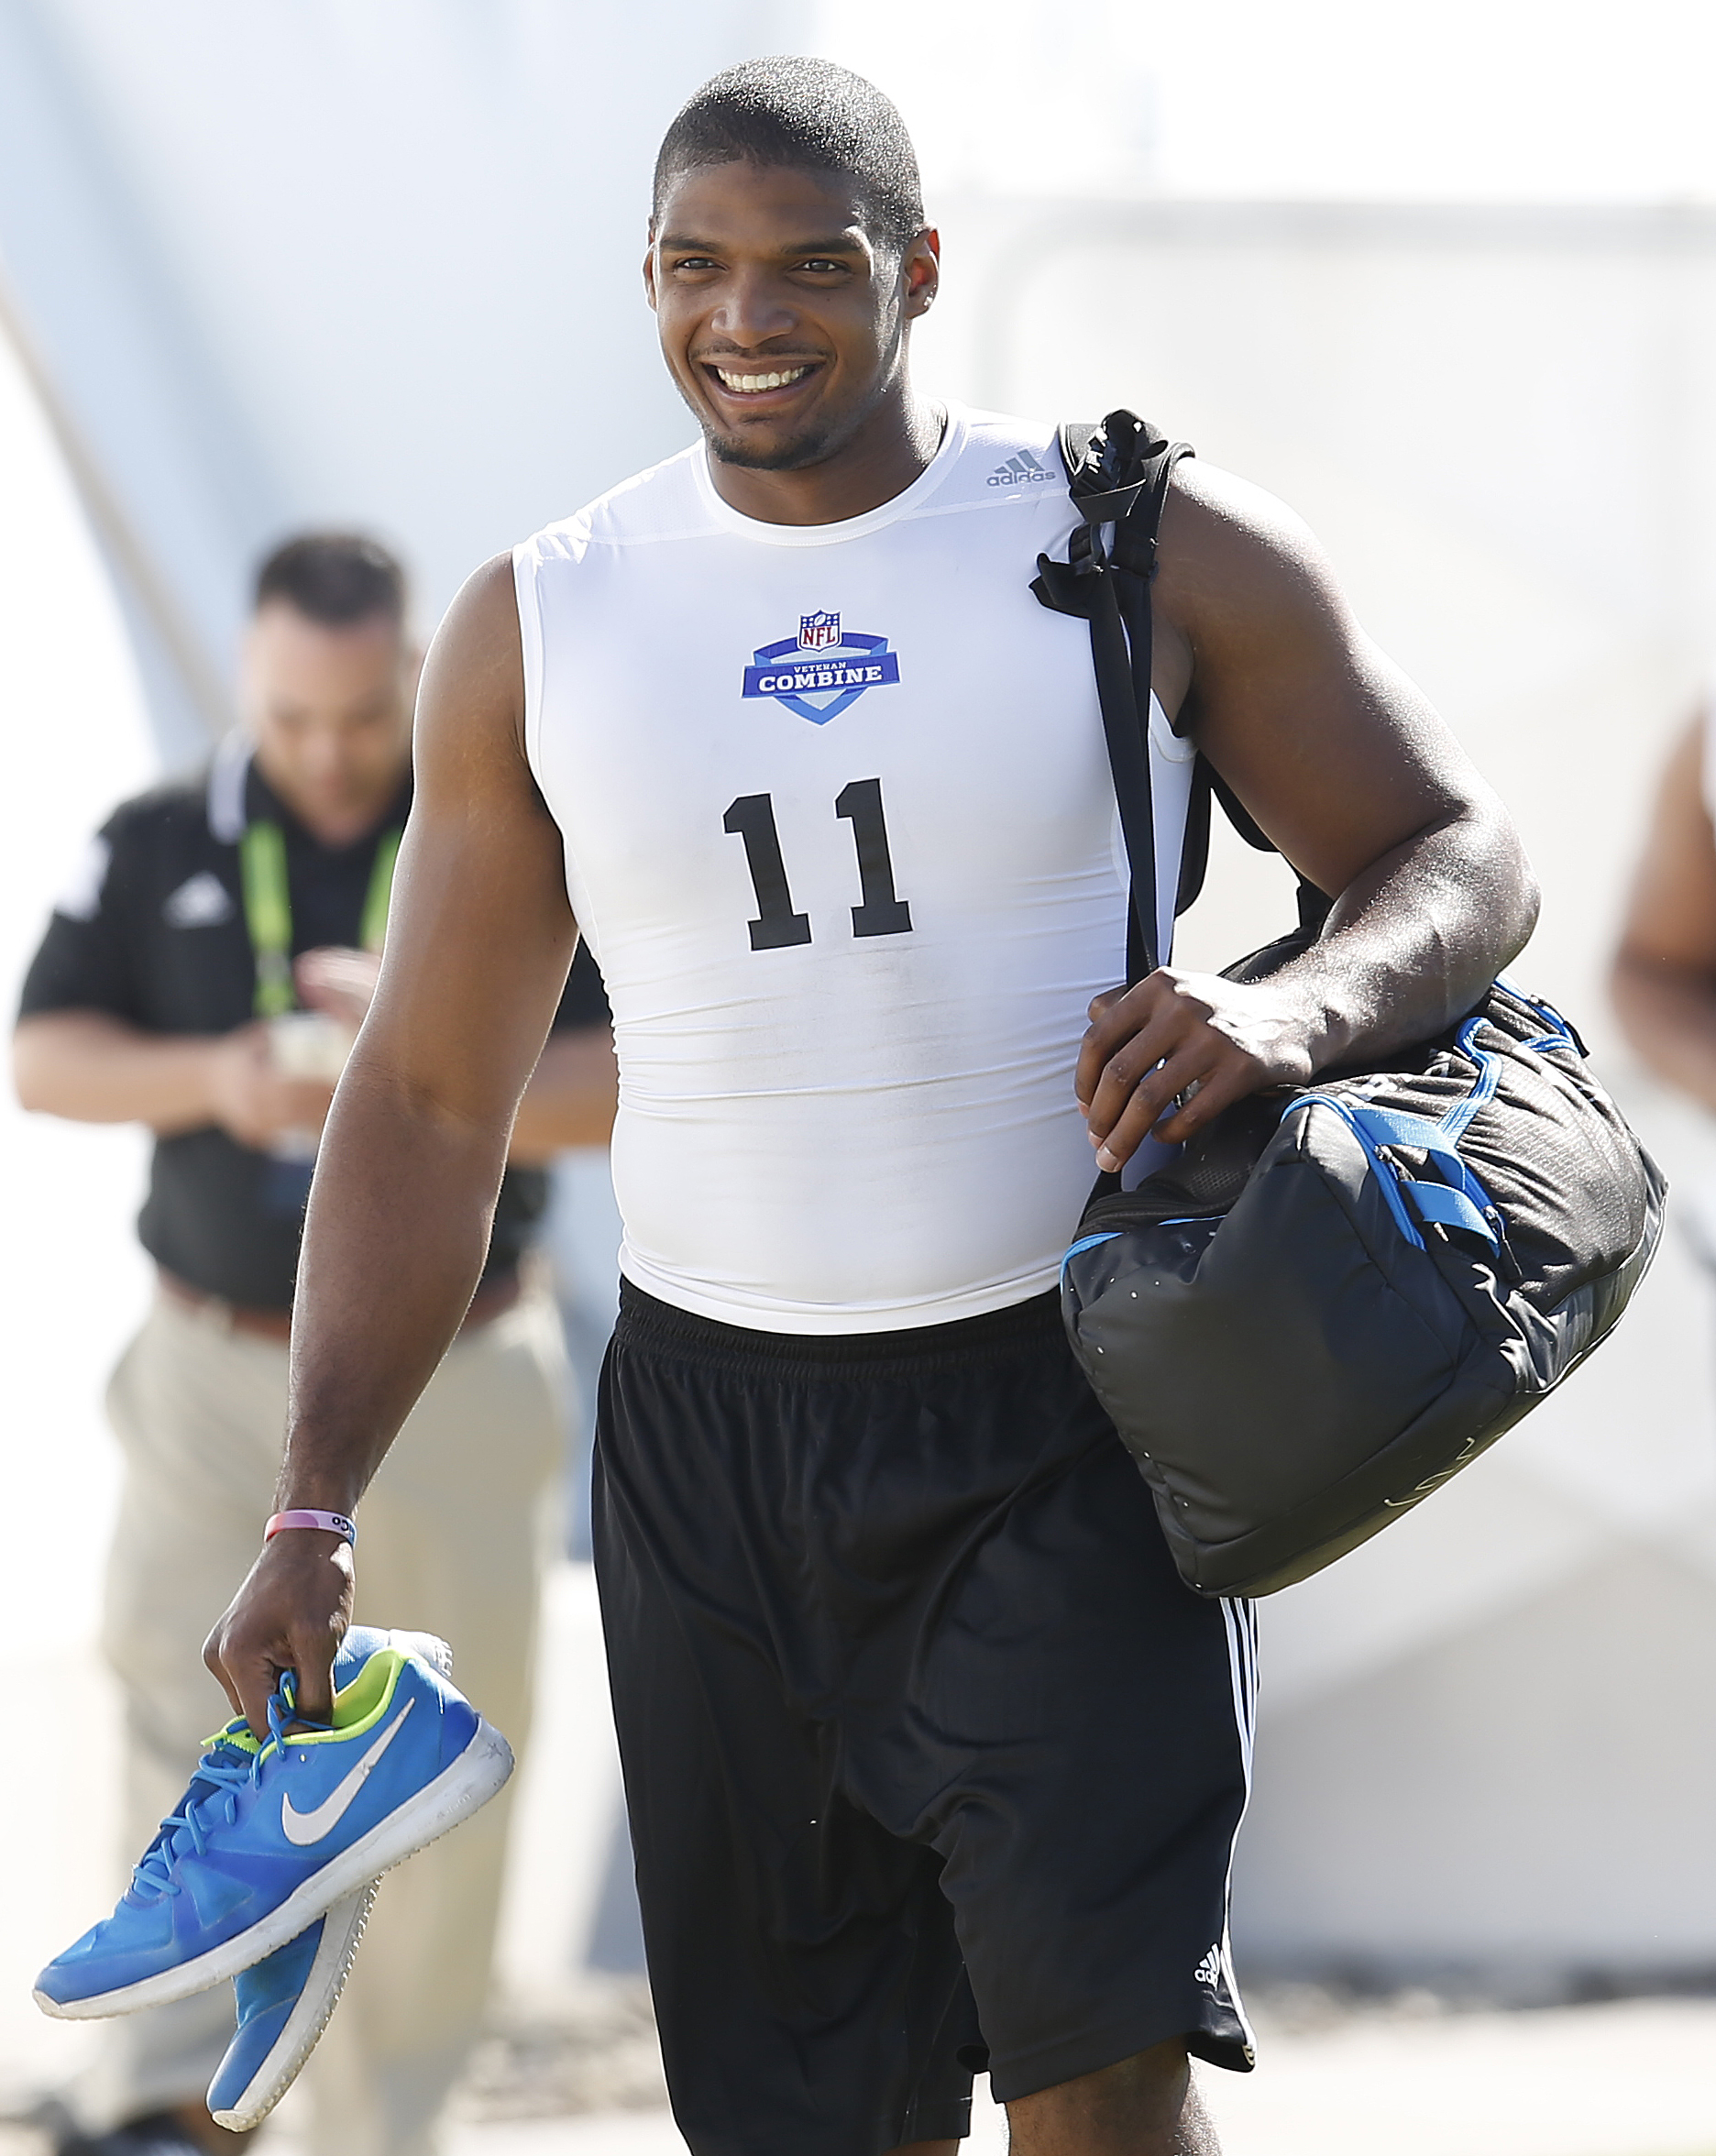 Defensive End Michael Sam, from Missouri, arrives before the NFL Super Regional Combine football workout on March 22, 2015 in Tempe, Ariz.